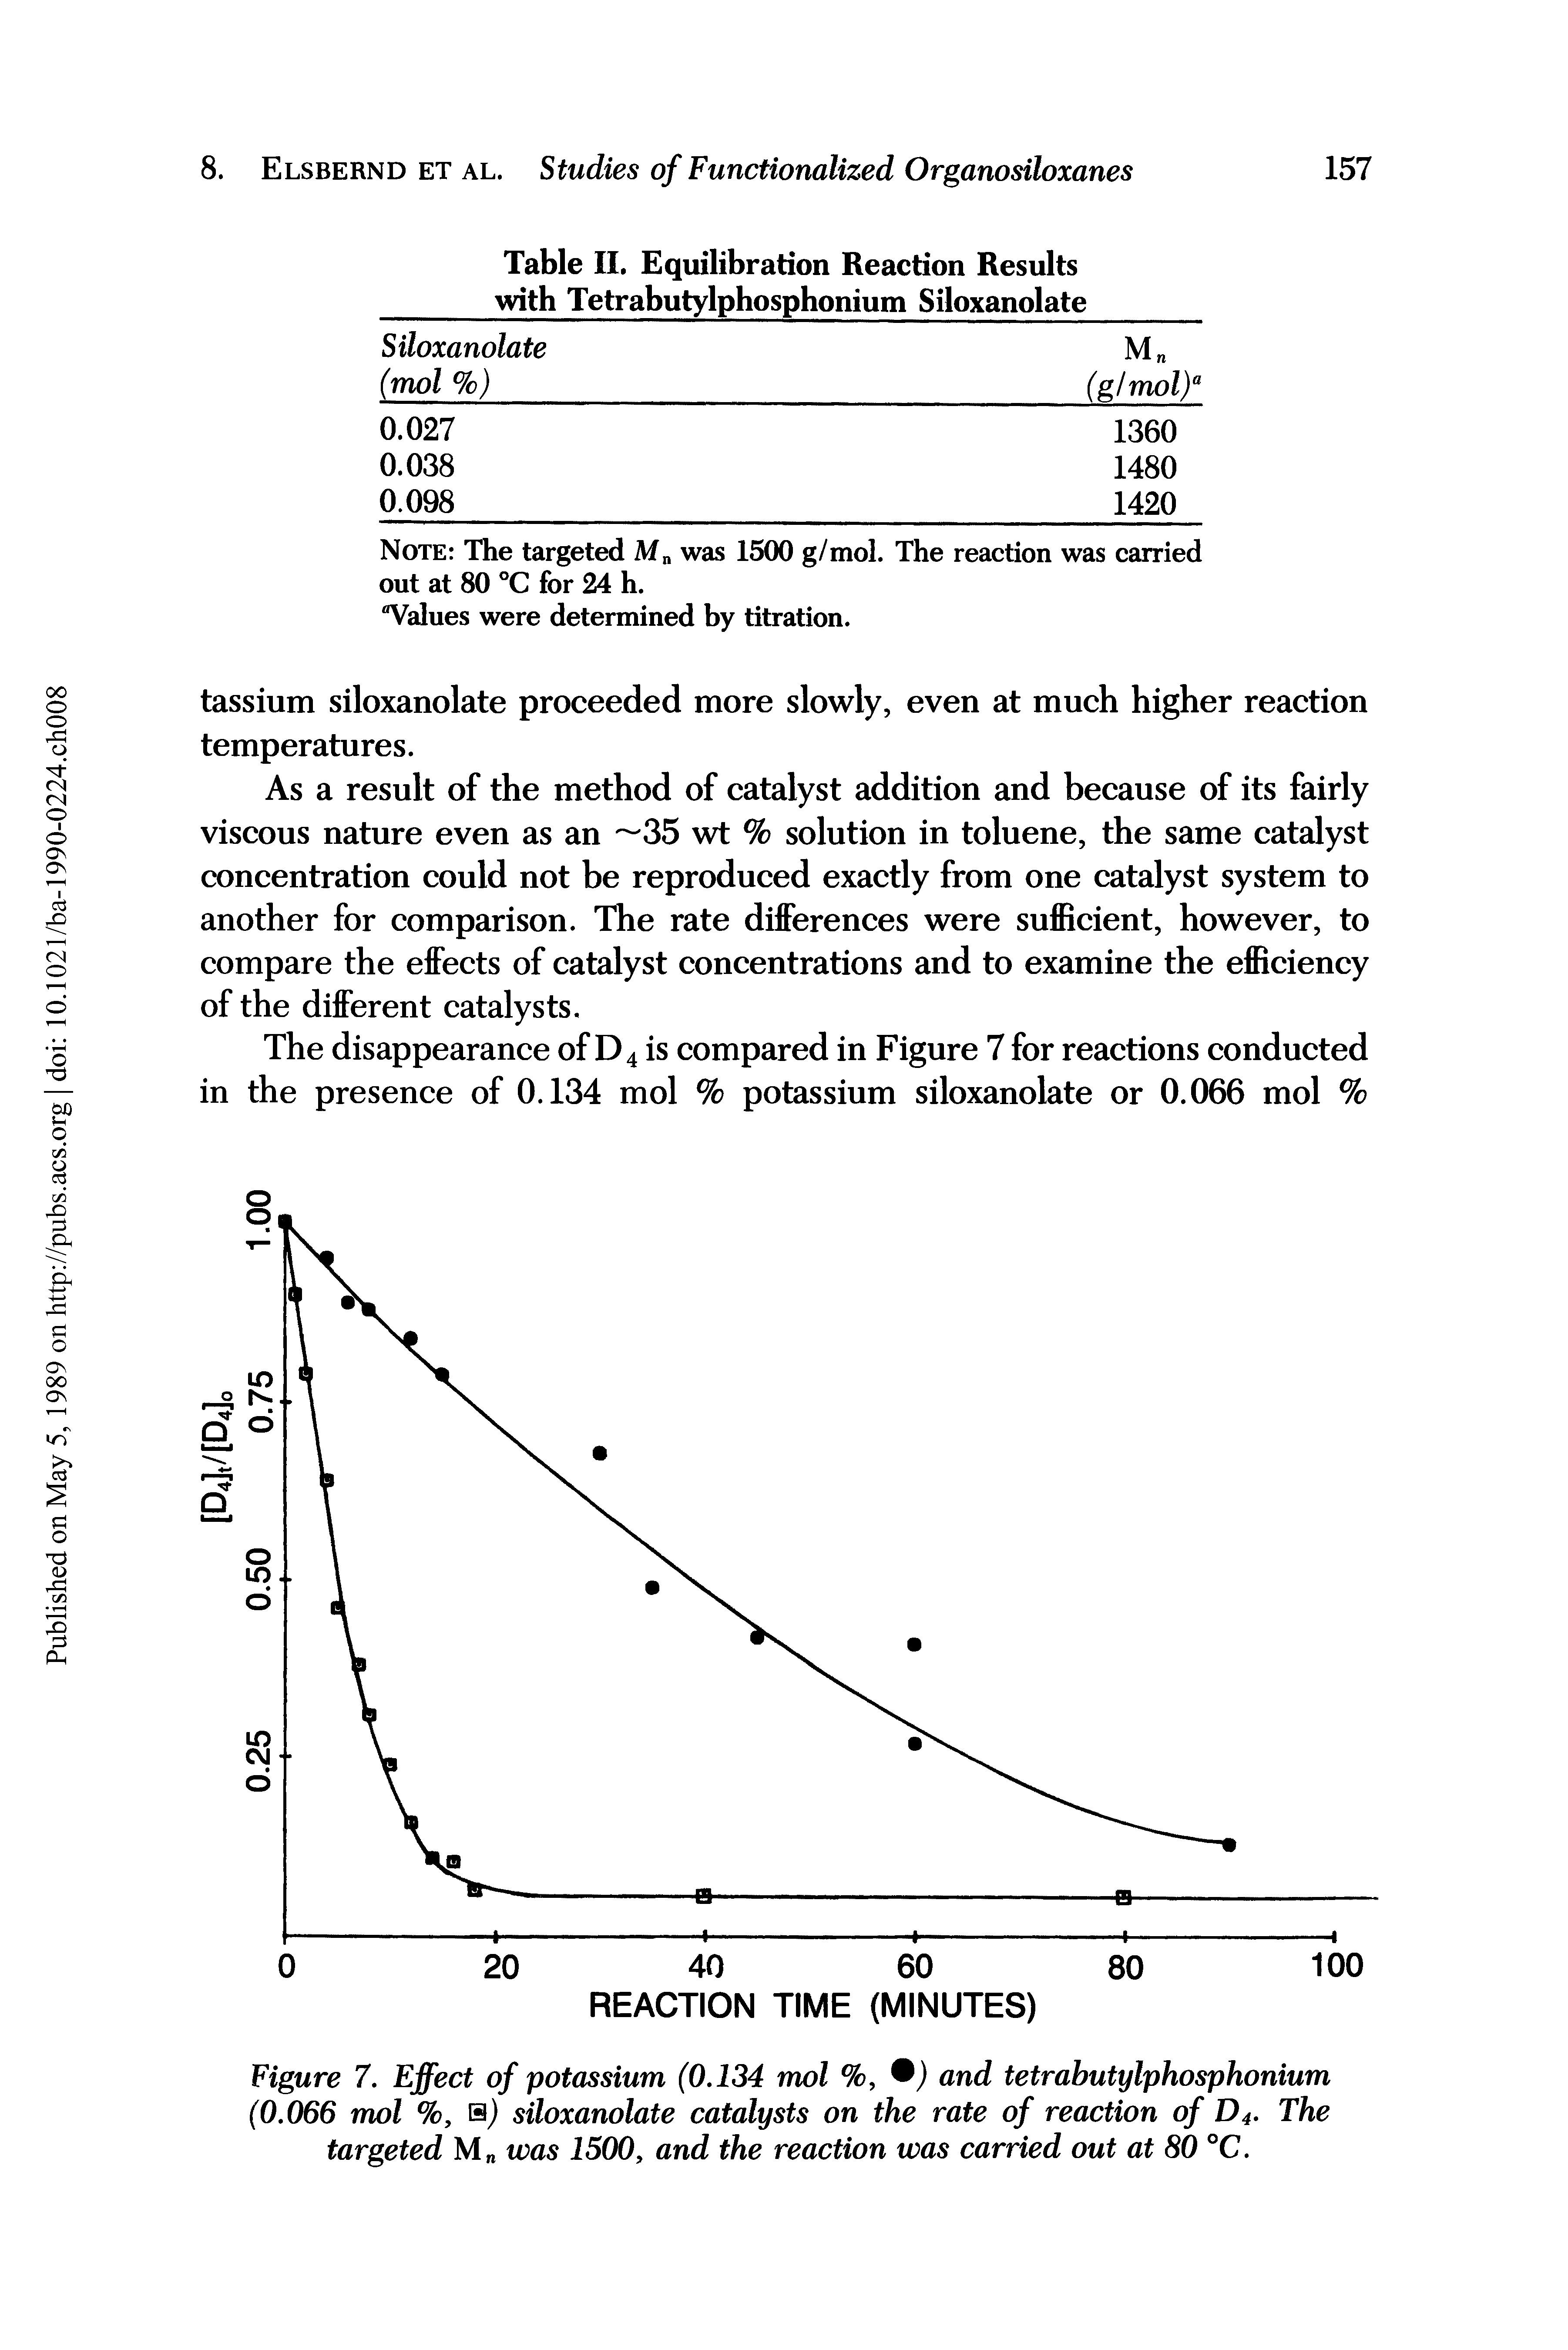 Figure 7. Effect of potassium (0.134 mol %, and tetrabutylphosphonium (0.066 mol %, s) siloxanolate catalysts on the rate of reaction of D4- The targeted M was 1500, and the reaction was carried out at 80 °C.